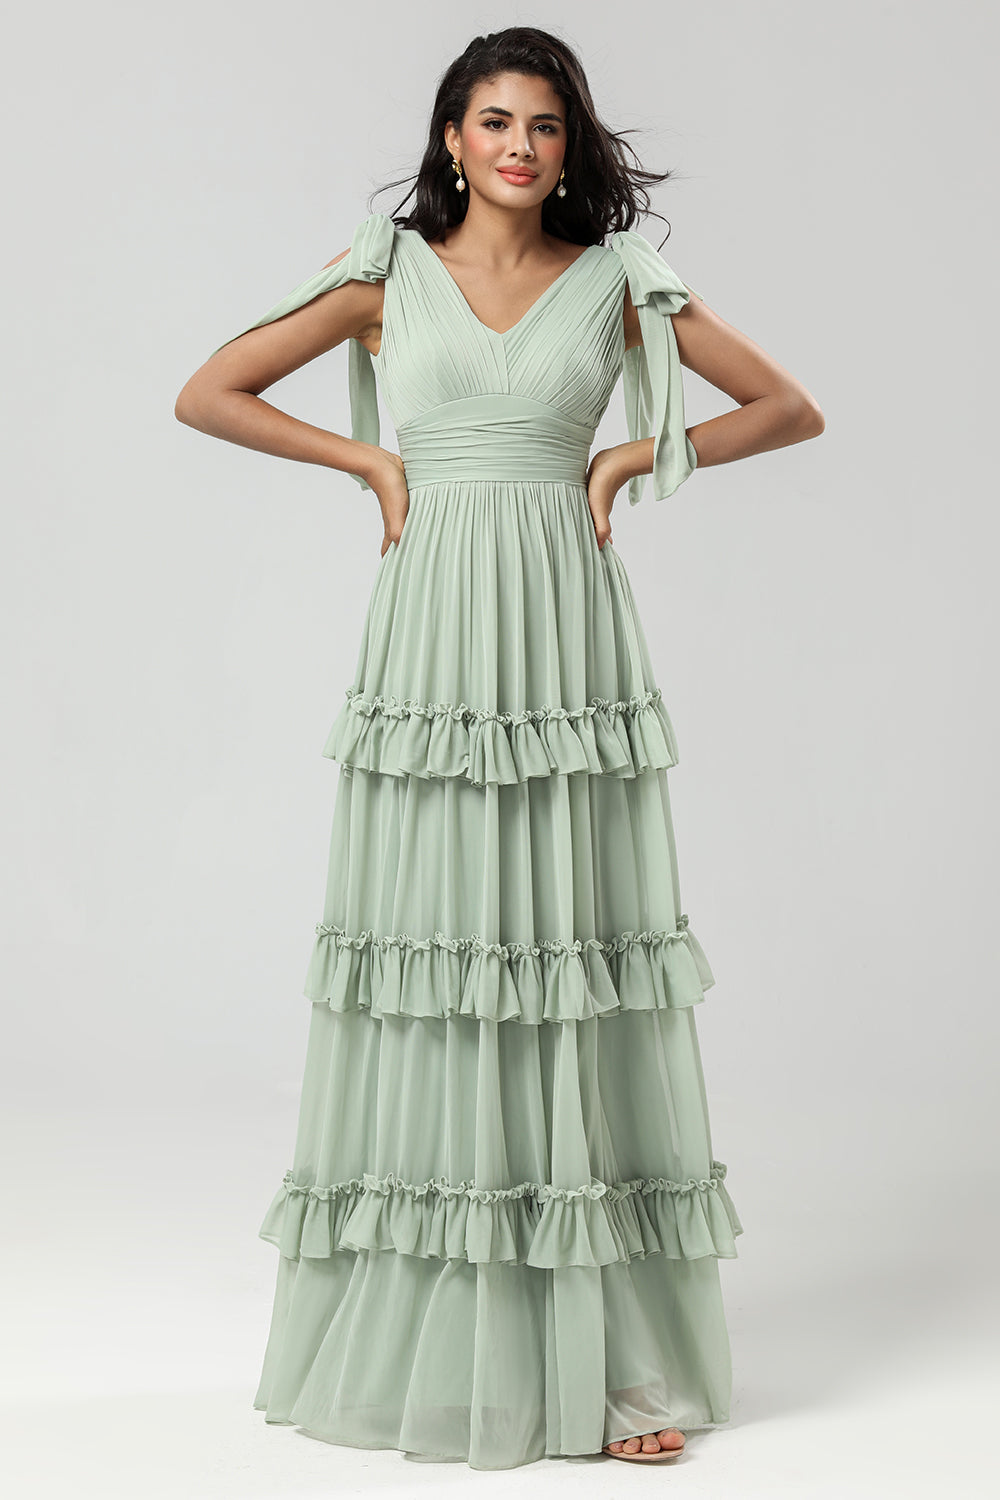 Dusty Sage A Line V-Neck Long Knitted Chiffon Bridesmaid Dress With Ruffles